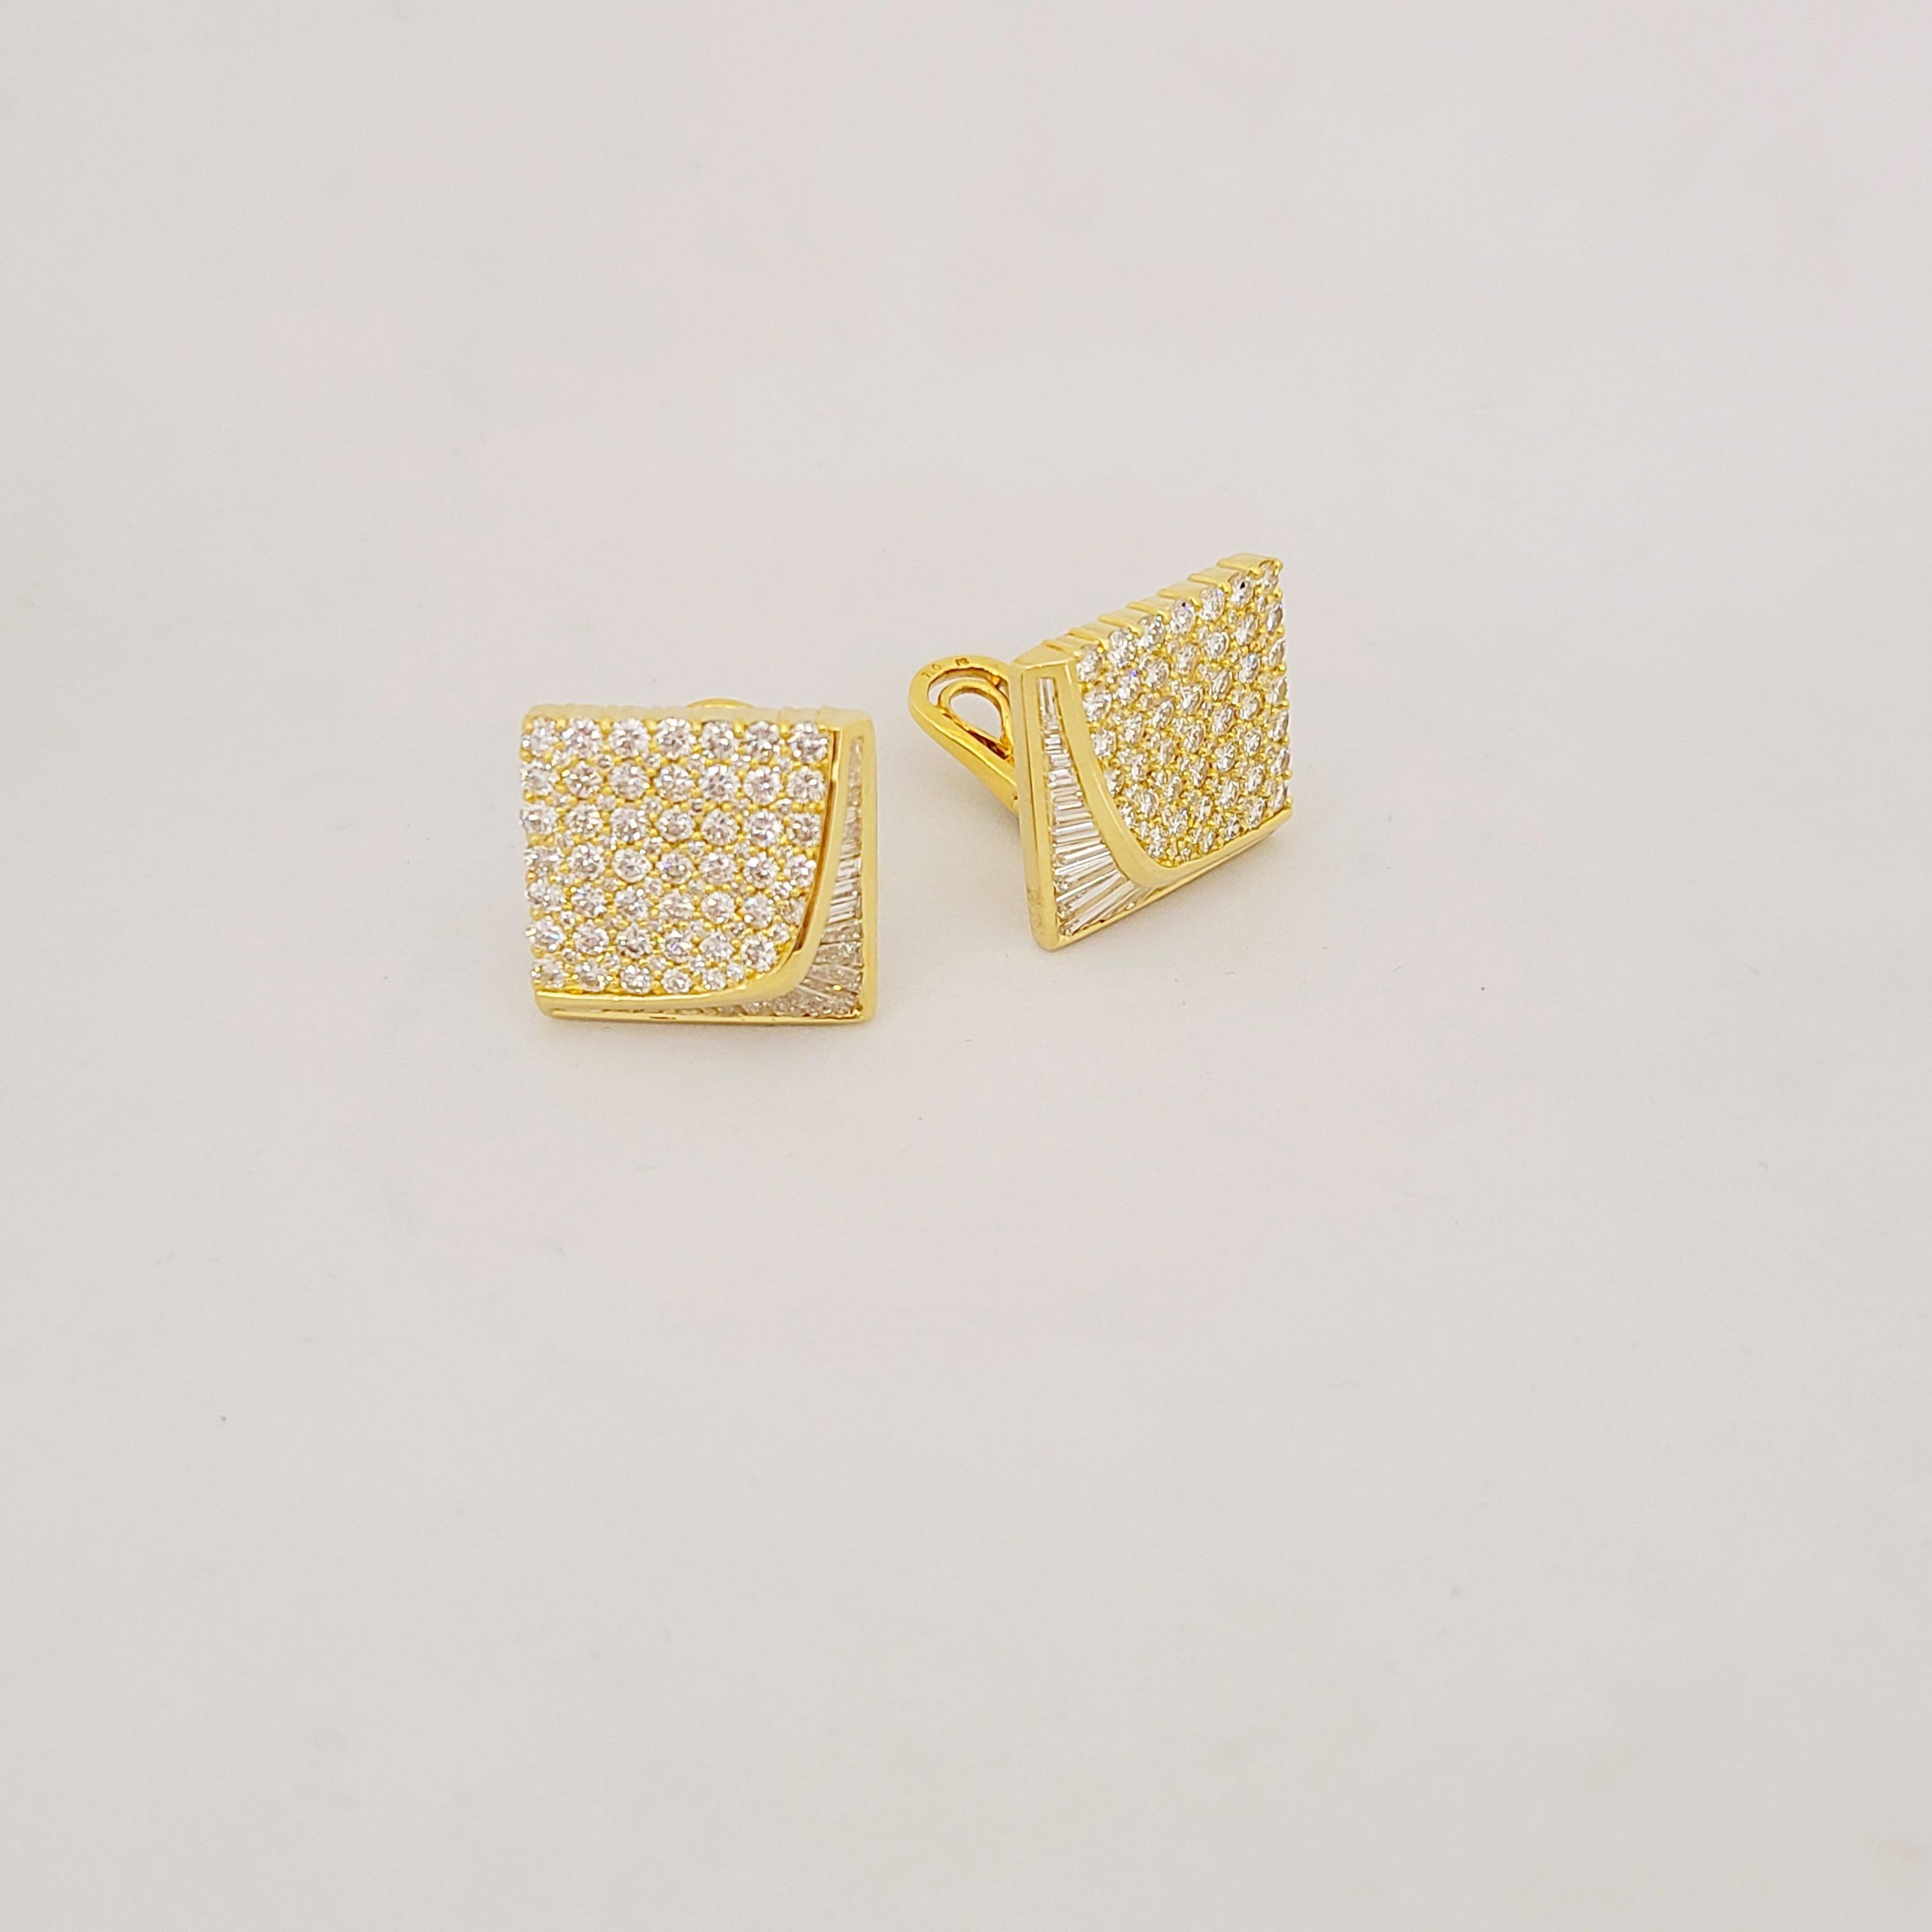 Nova 18 Karat Yellow Gold, 6.88 Carat Diamond Square Shaped Earrings In New Condition For Sale In New York, NY